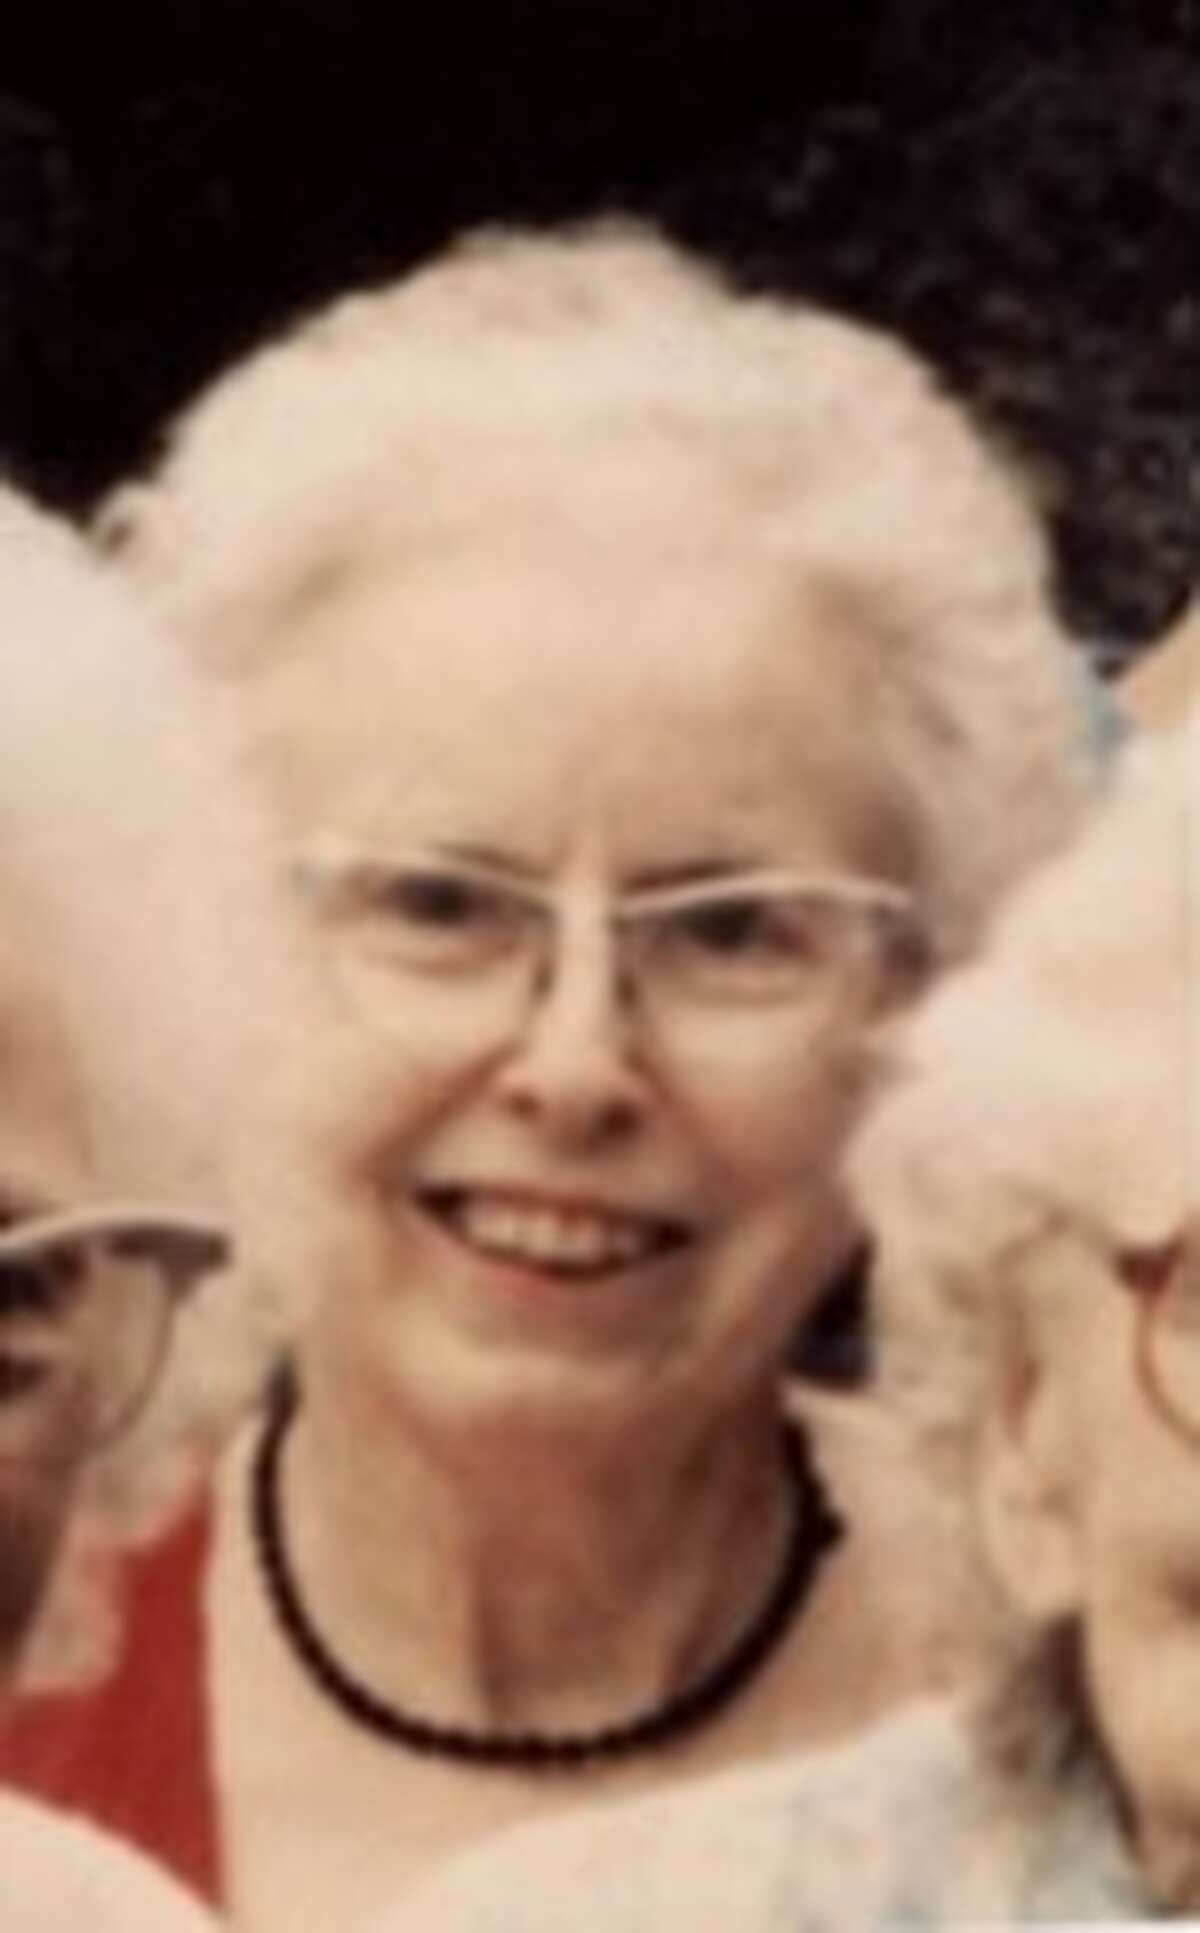 On Aug. 19, 1994, family members found 81-year-old Wilomeana 'Violet' Filkins dead in her ground floor apartment in East Greenbush. Autopsy results showed Filkins died from several blows to the back of her head. A press conference will be held Thursday morning regarding the 28-year-old cold case.  (State Police)